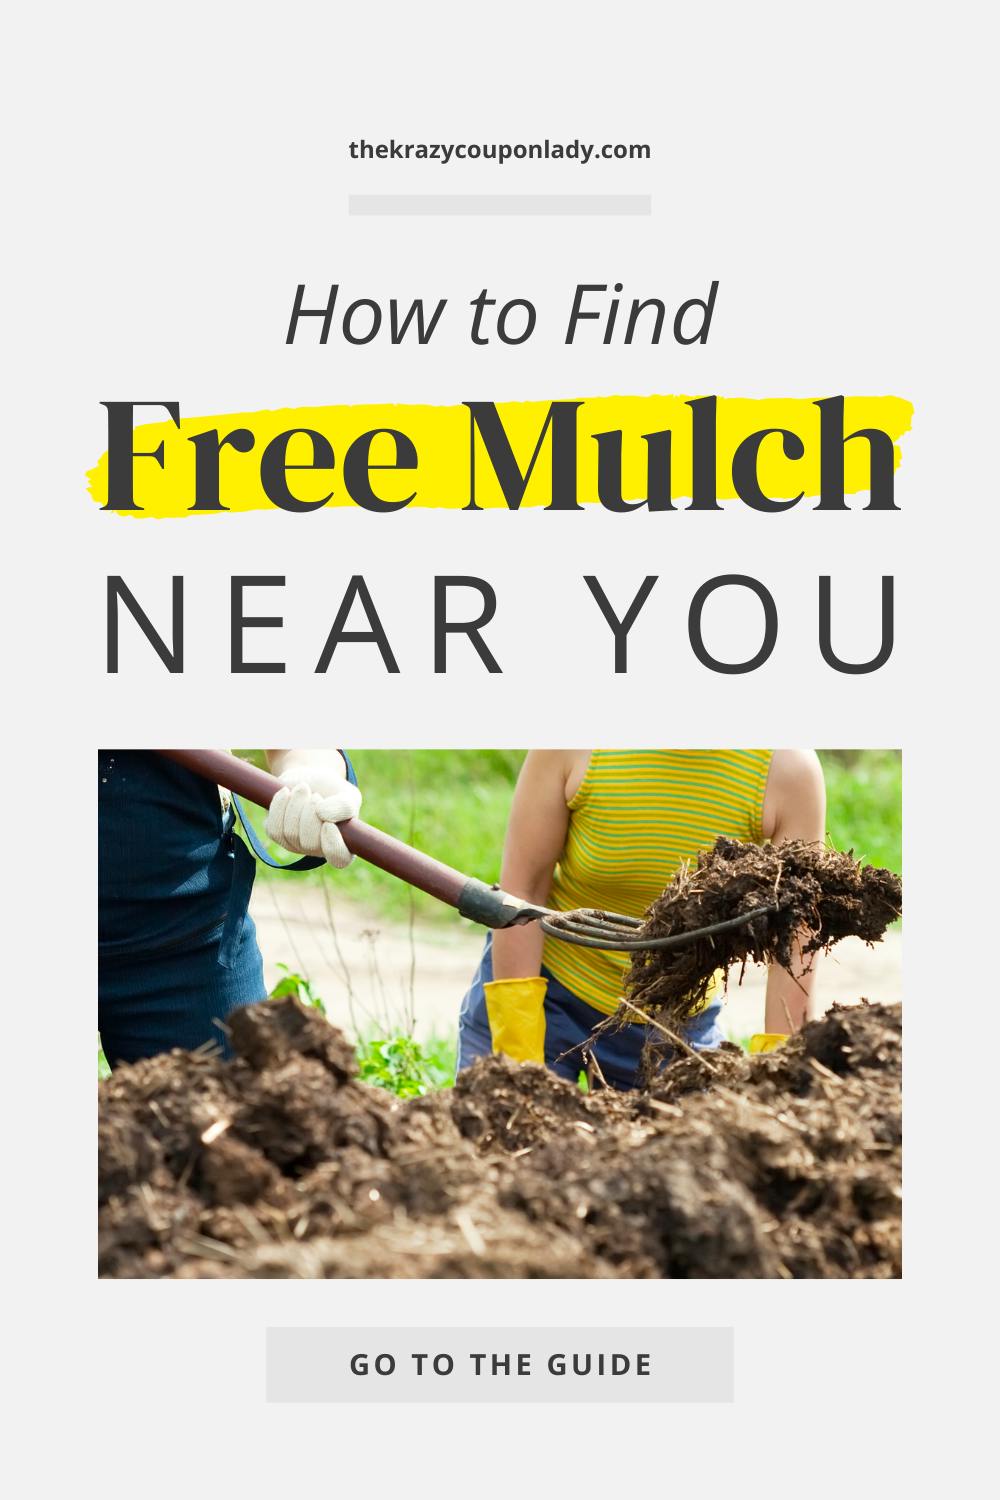 You Can Find Free Mulch Near You, but You May Want to Pay